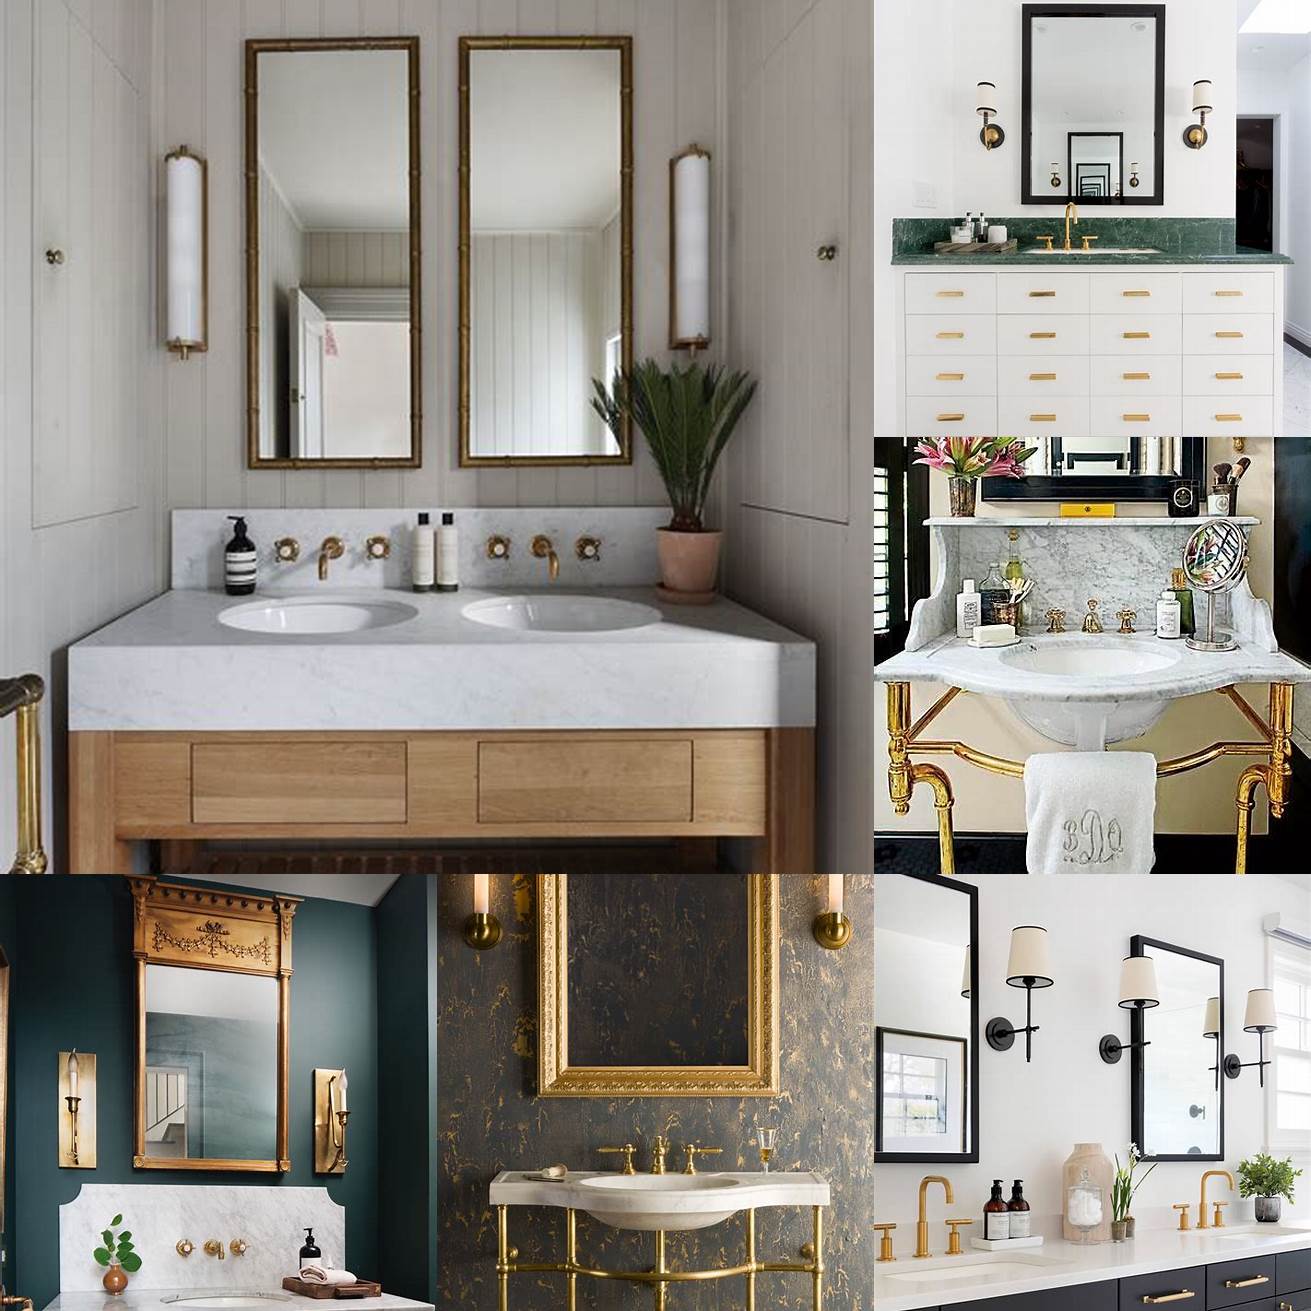 A vintage-inspired vanity with a marble countertop and brass hardware